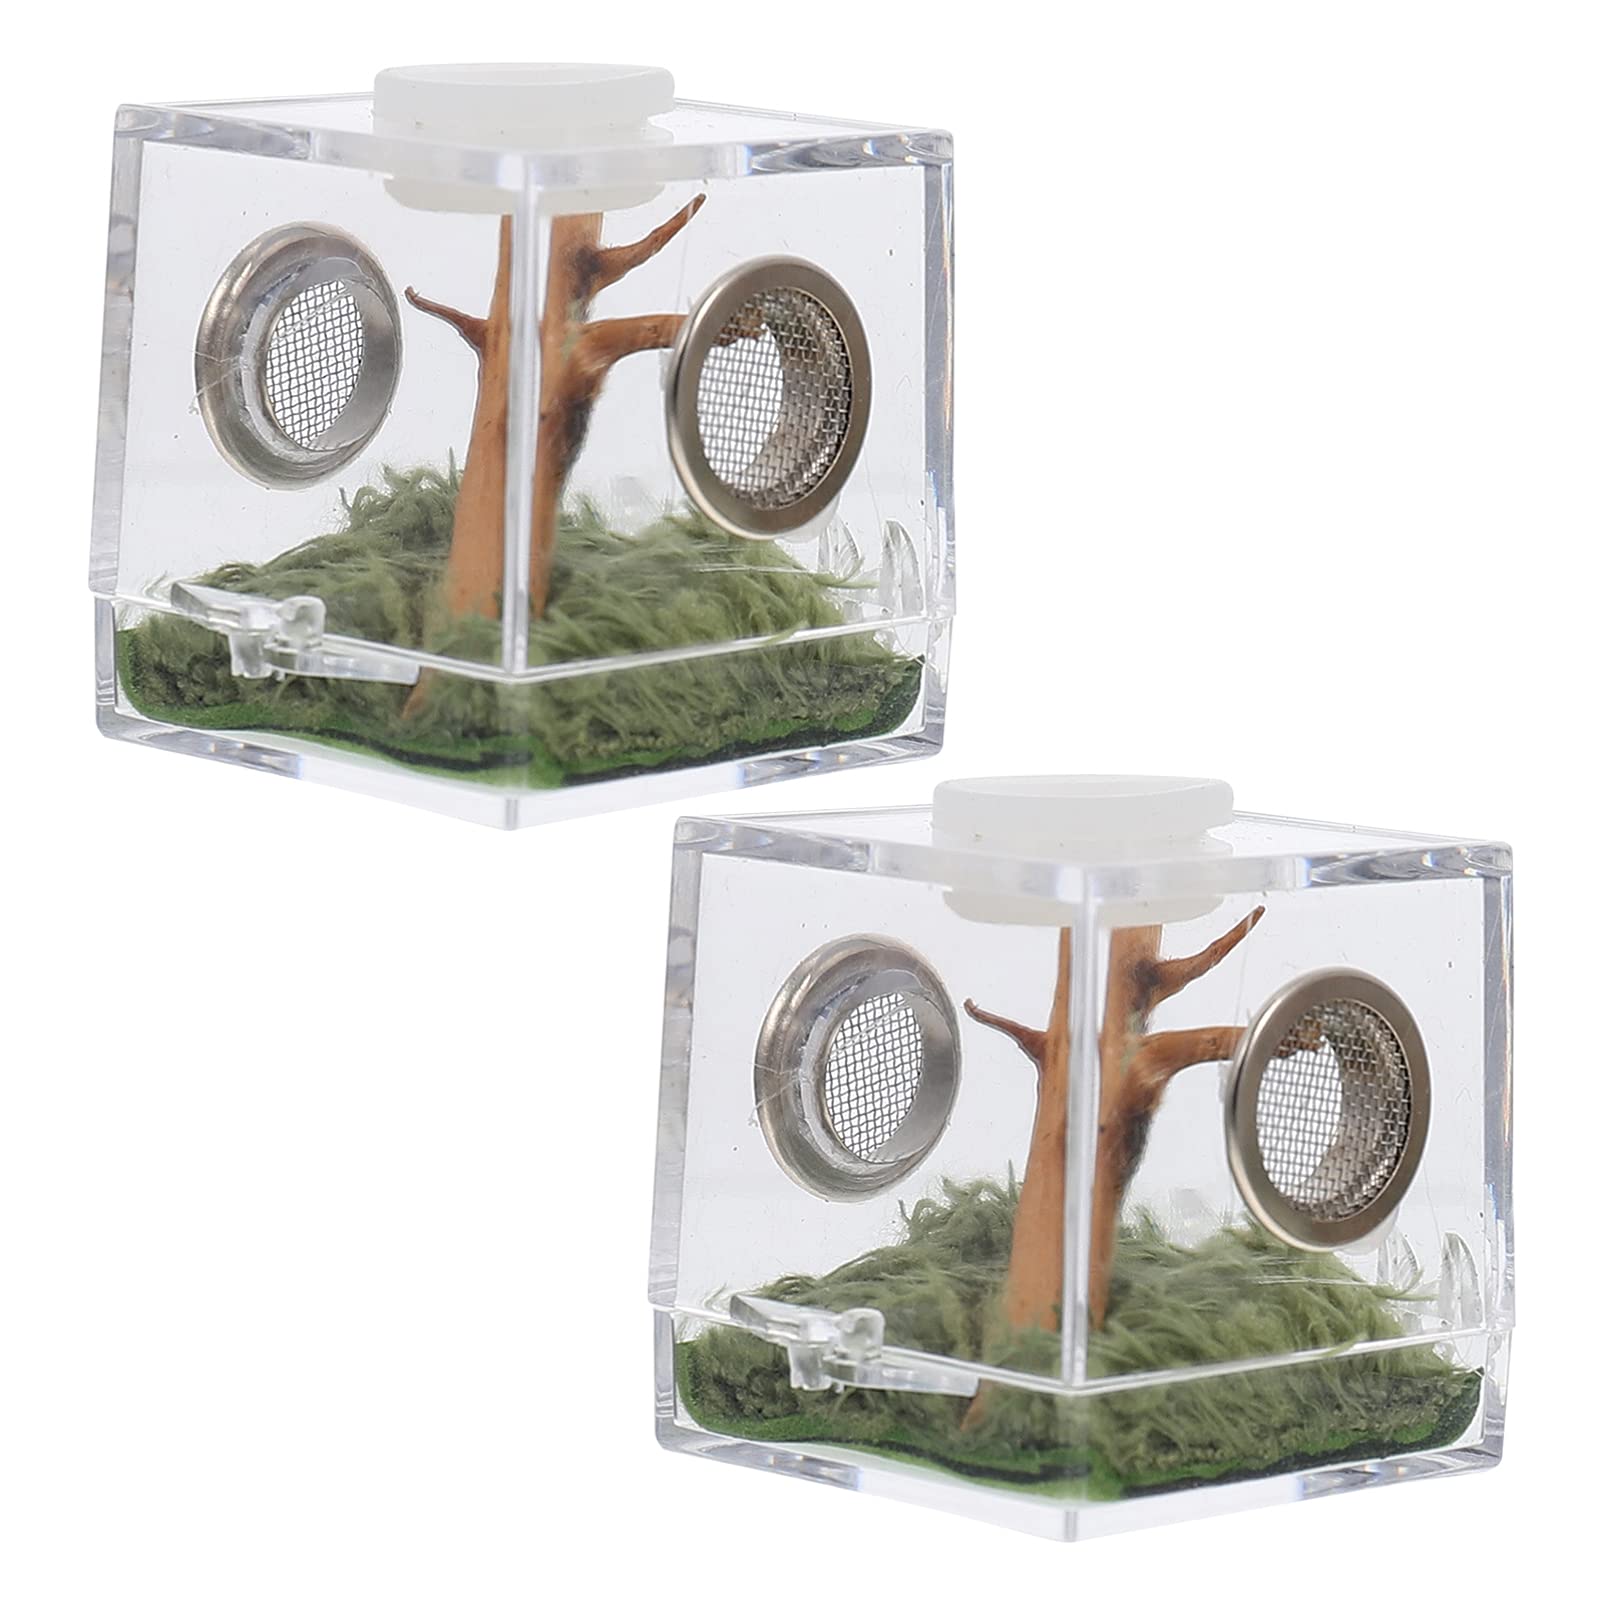 HZLHZYY Acrylic Critter Keeper Jumping Spider Enclosure Snail Container House Accessories Reptile Terrarium Insect Enclosure Tank Snail Spider Habitat